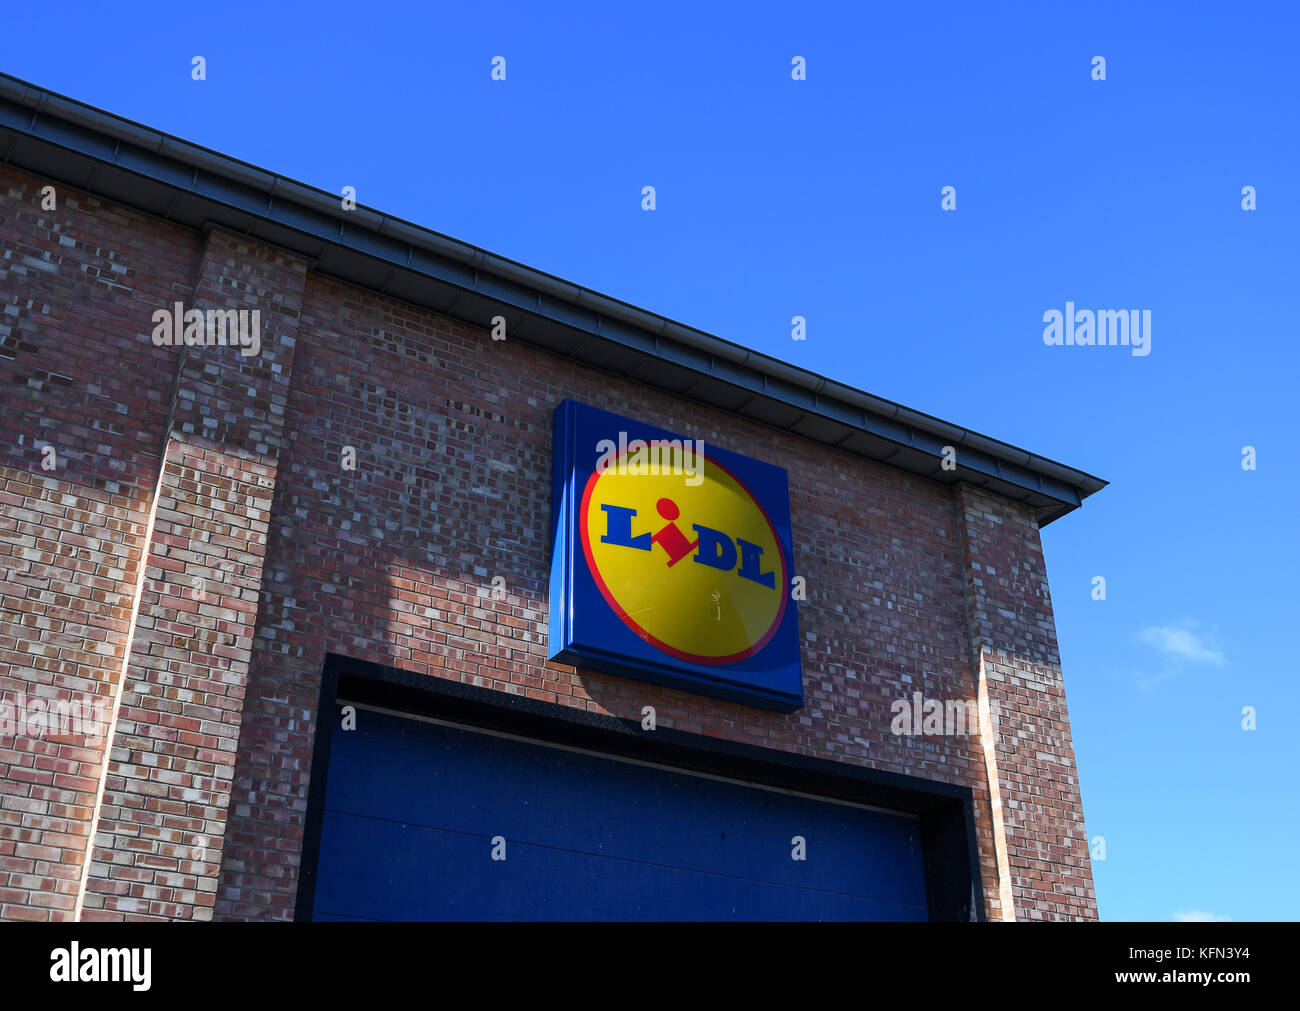 Logo and sign of Lidl shop on brick wall Stock Photo - Alamy